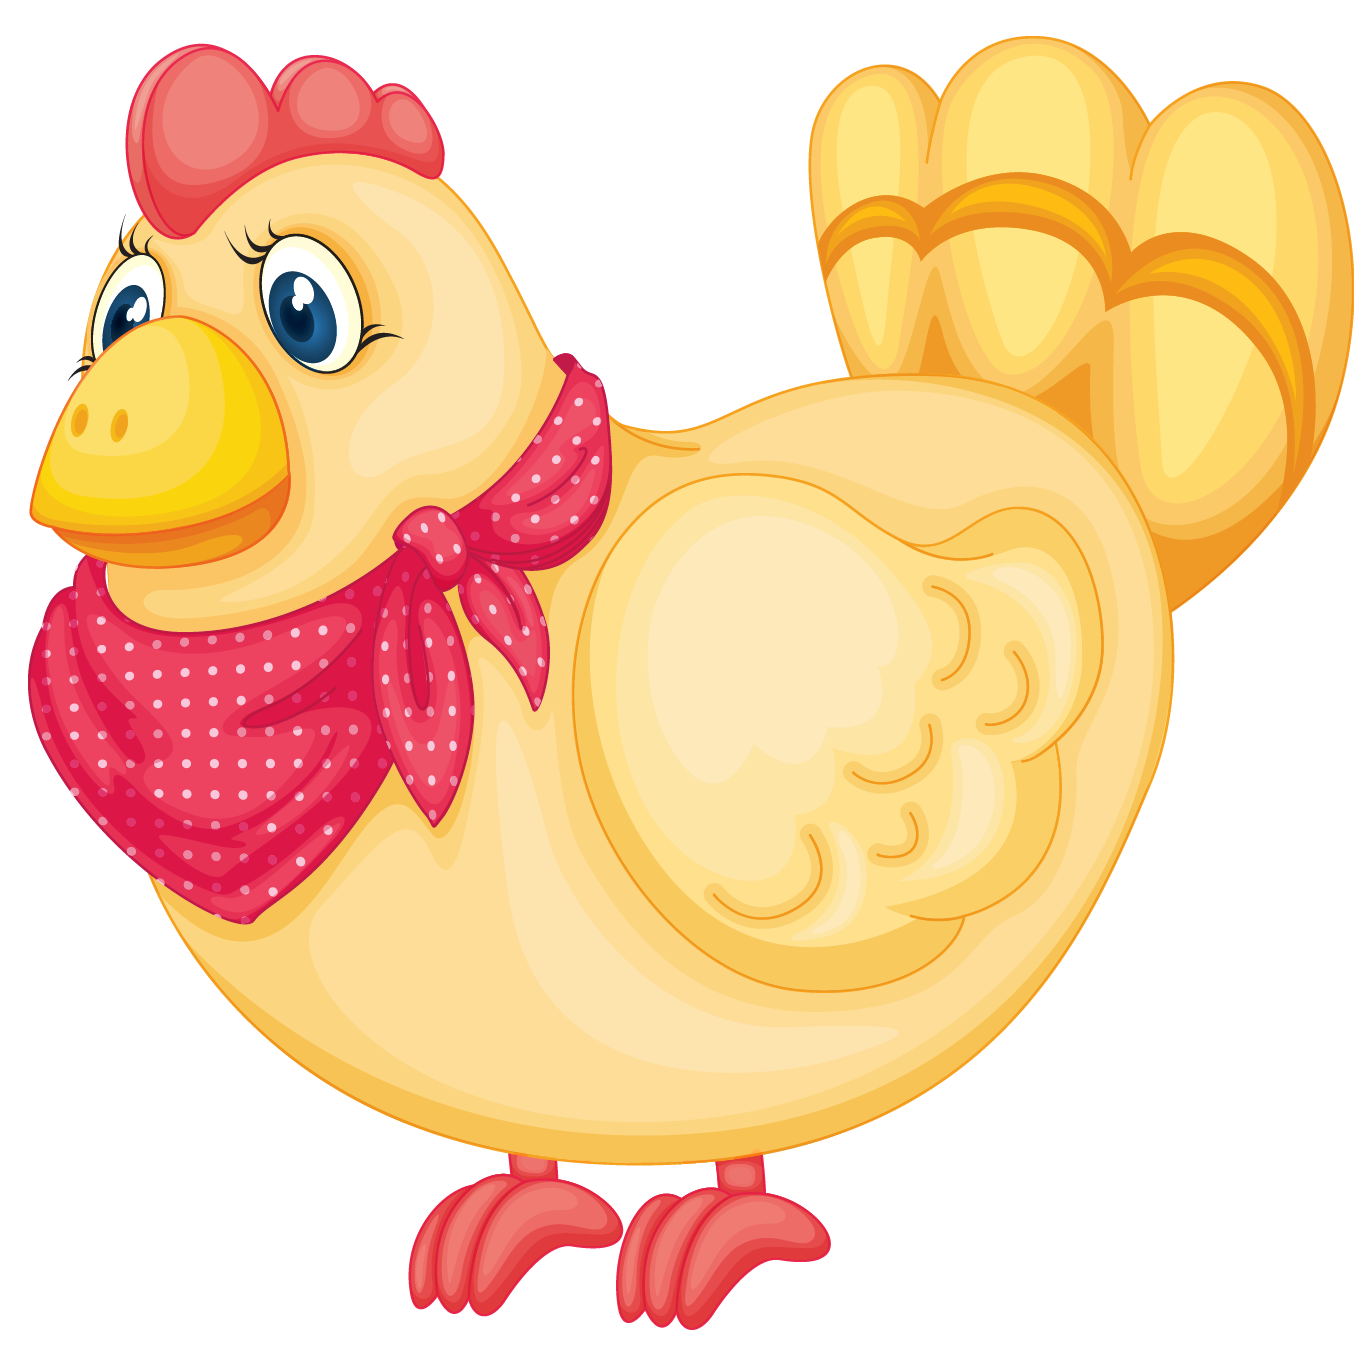 chicken images free clip art - photo #22